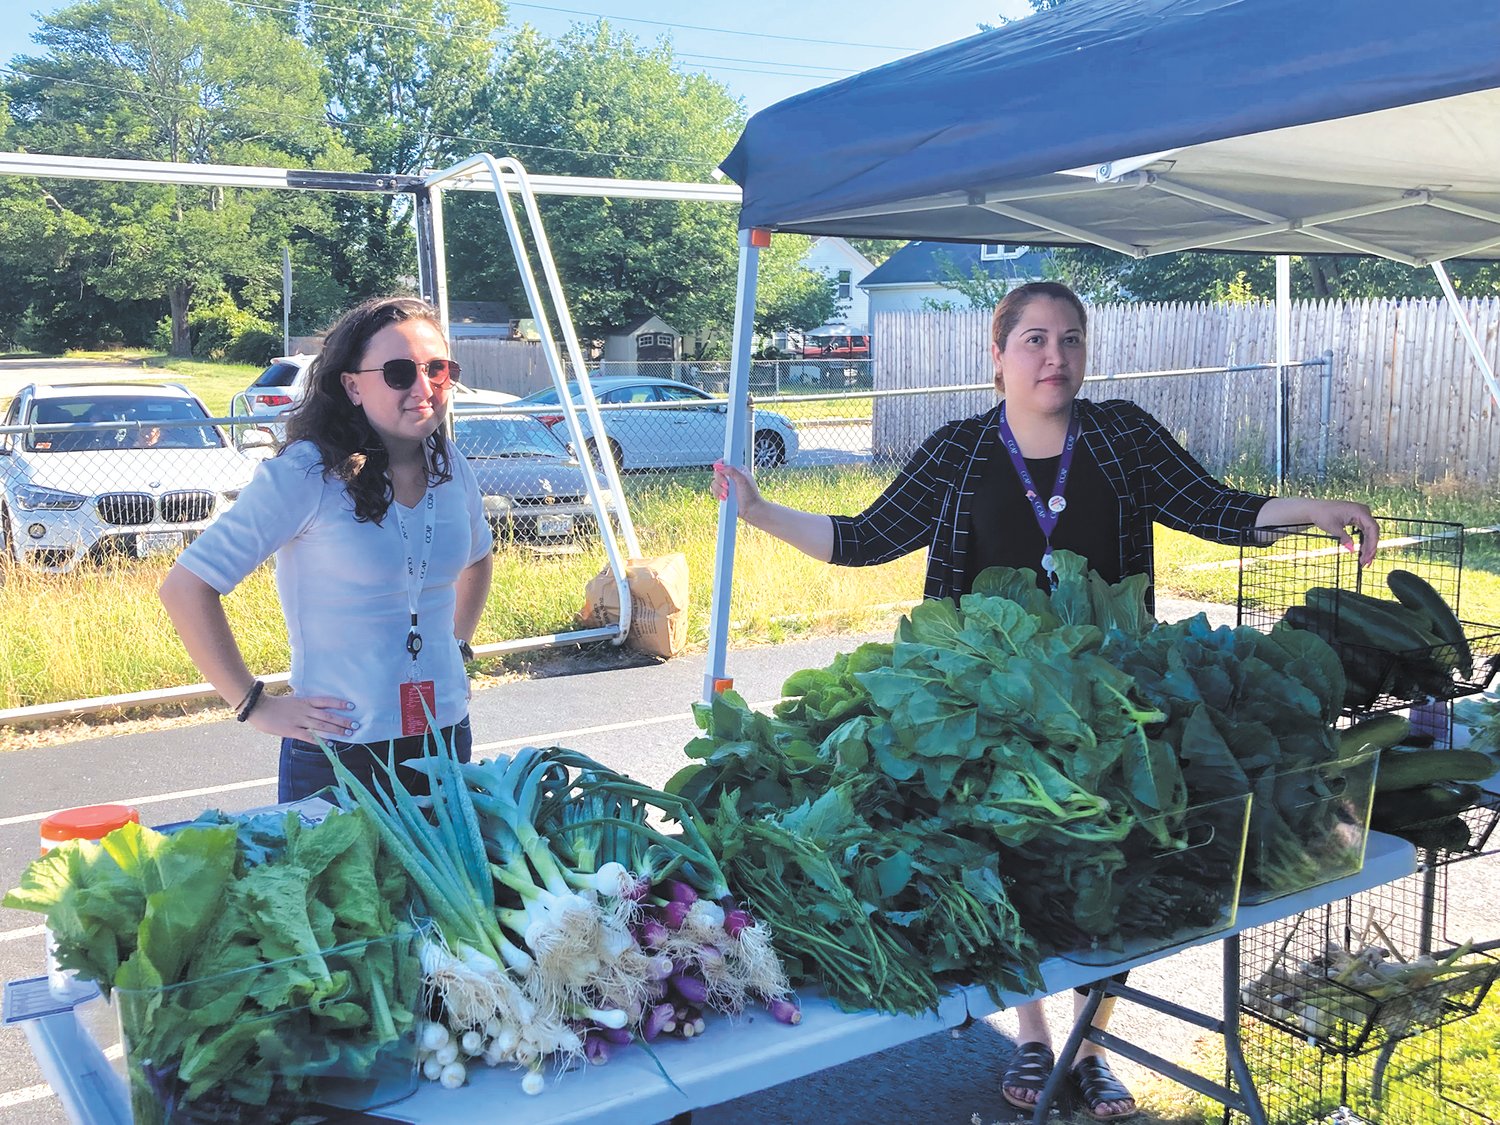 STOPPING BY FOR FRESH FOOD: Cranston residents stopped by OneCranston HEZ’s farmer’s market on July 7. The produce included kale, collard greens, garlic and scape, beets, amaranth, green onions, zucchini, cucumbers, scallions, bok choy and lettuce. (Herald photo)